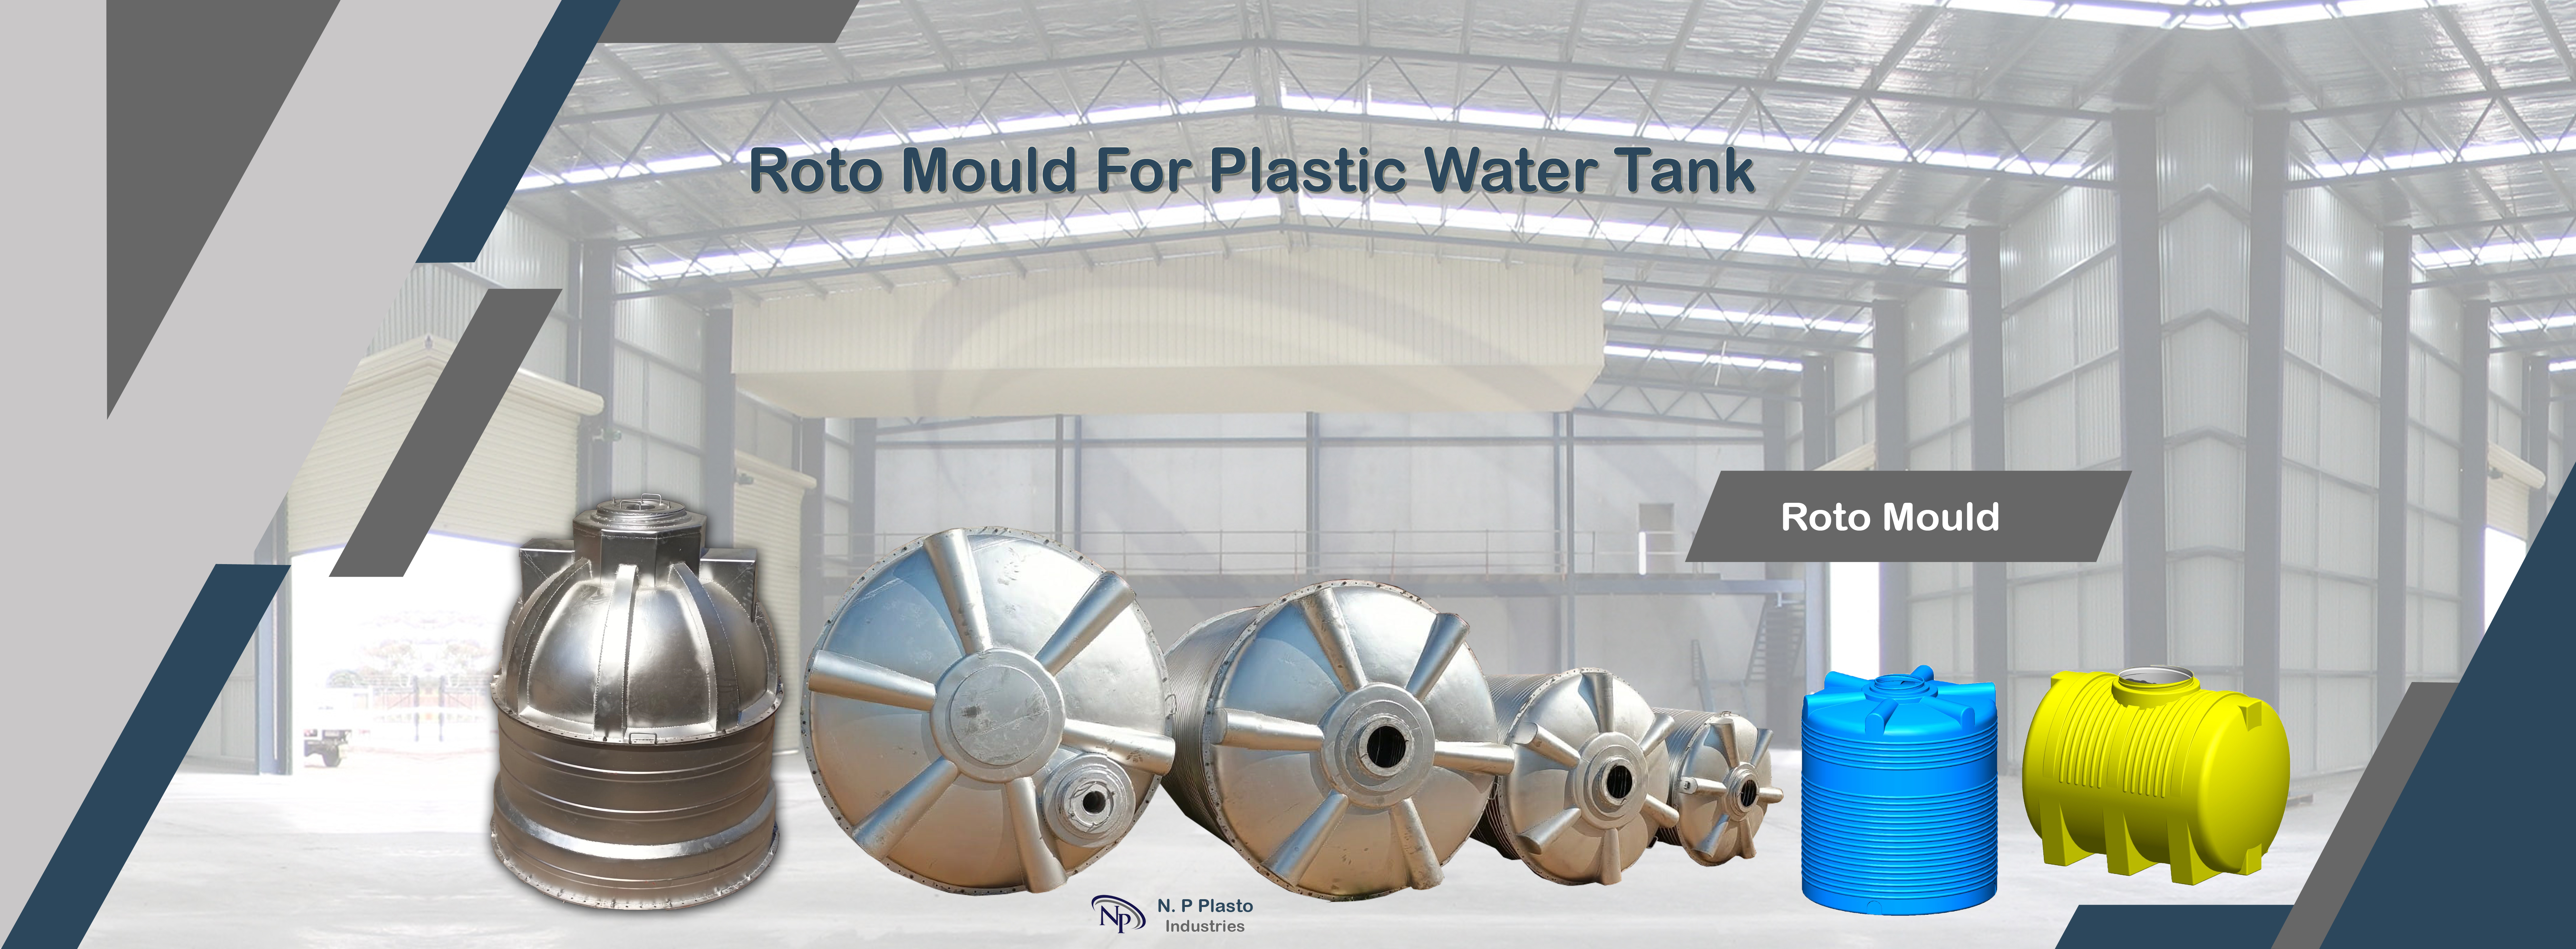 roto-mould-for-plastic-warer-tank